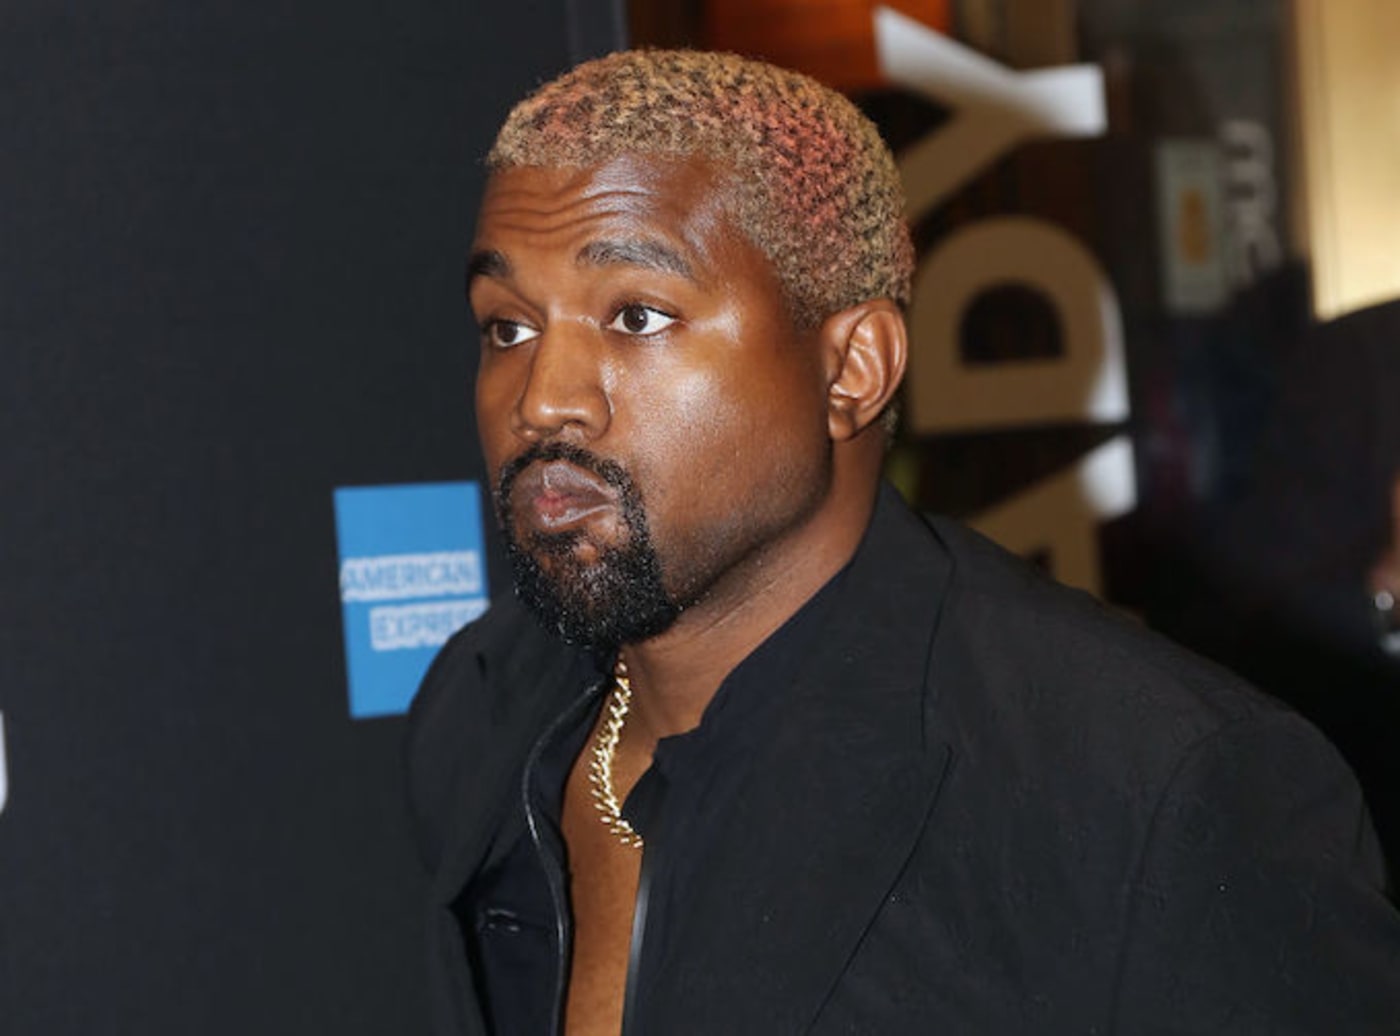 This is a picture of Kanye.